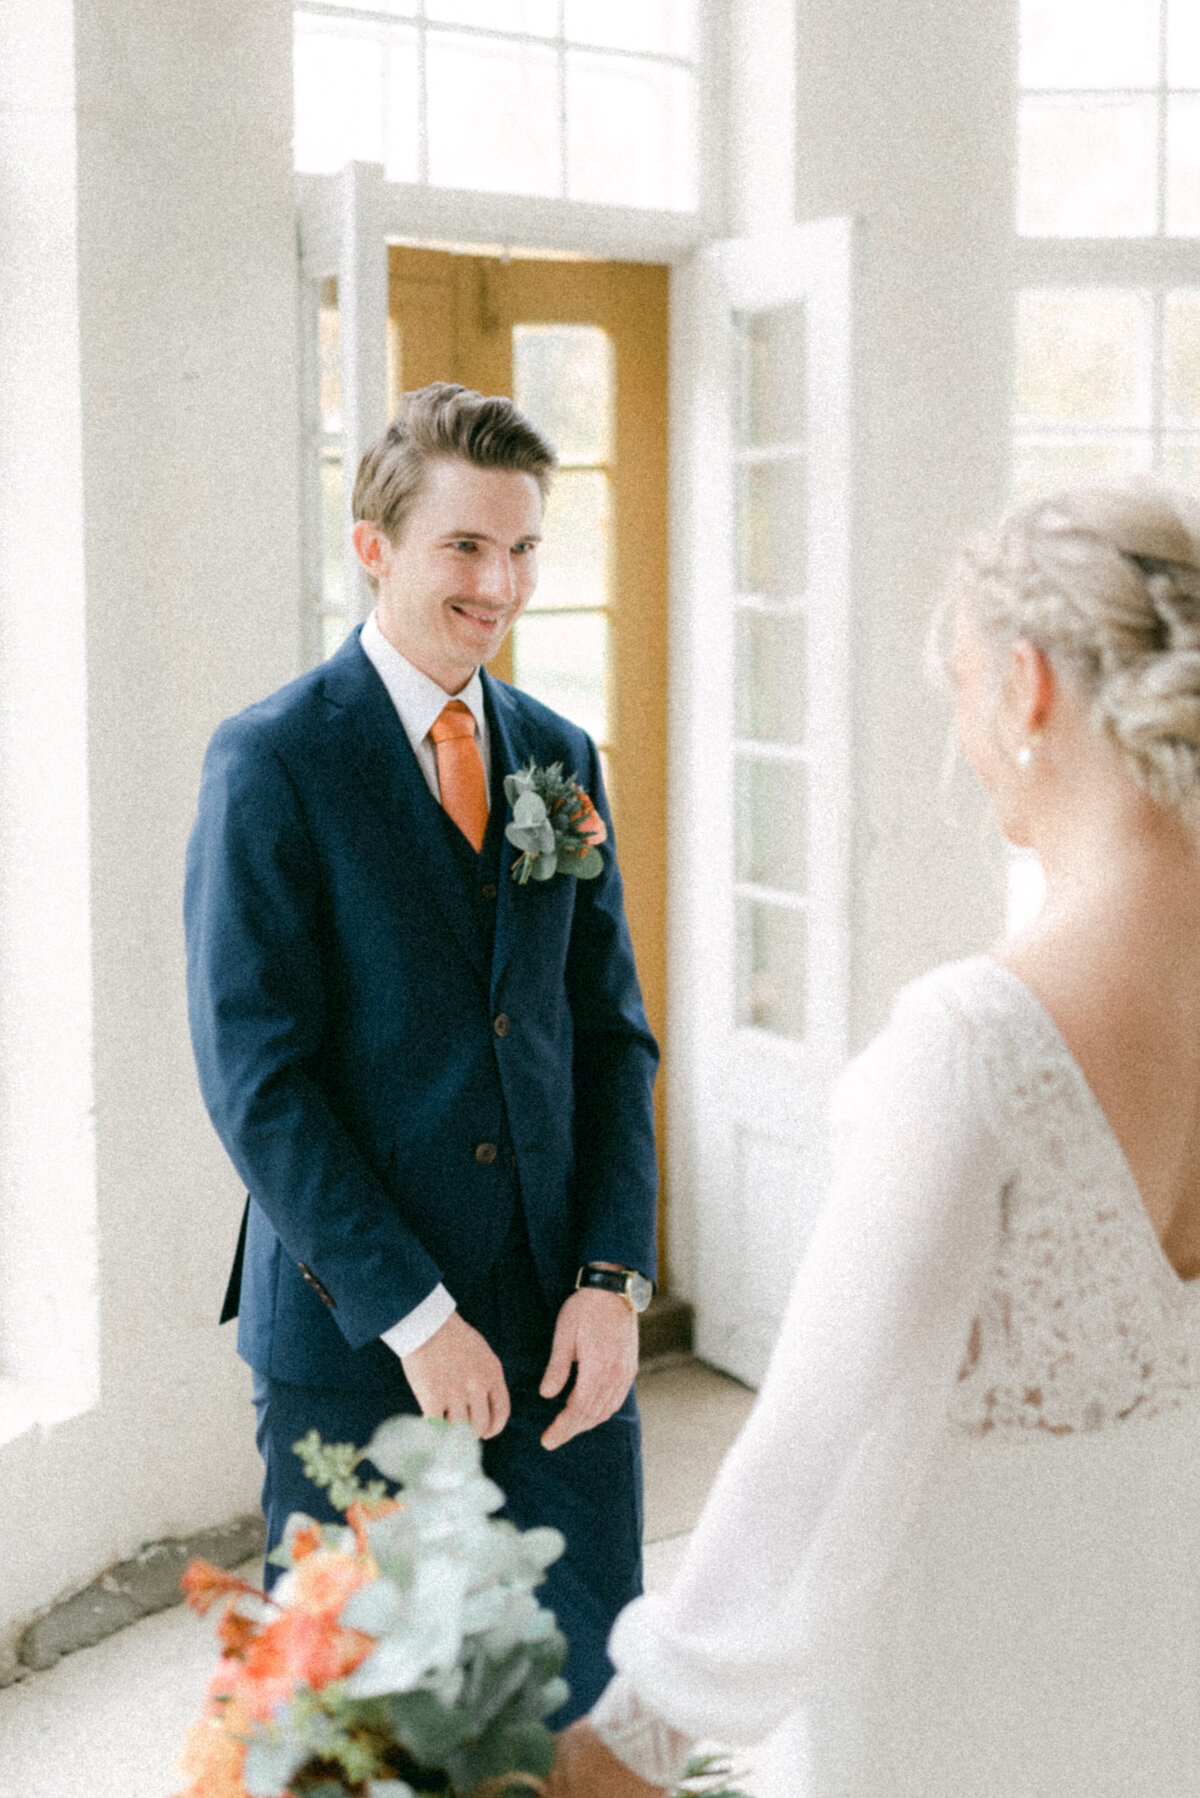 A documentary wedding photo of the first look in Oitbacka gård captured by wedding photographer Hannika Gabrielsson in Finland